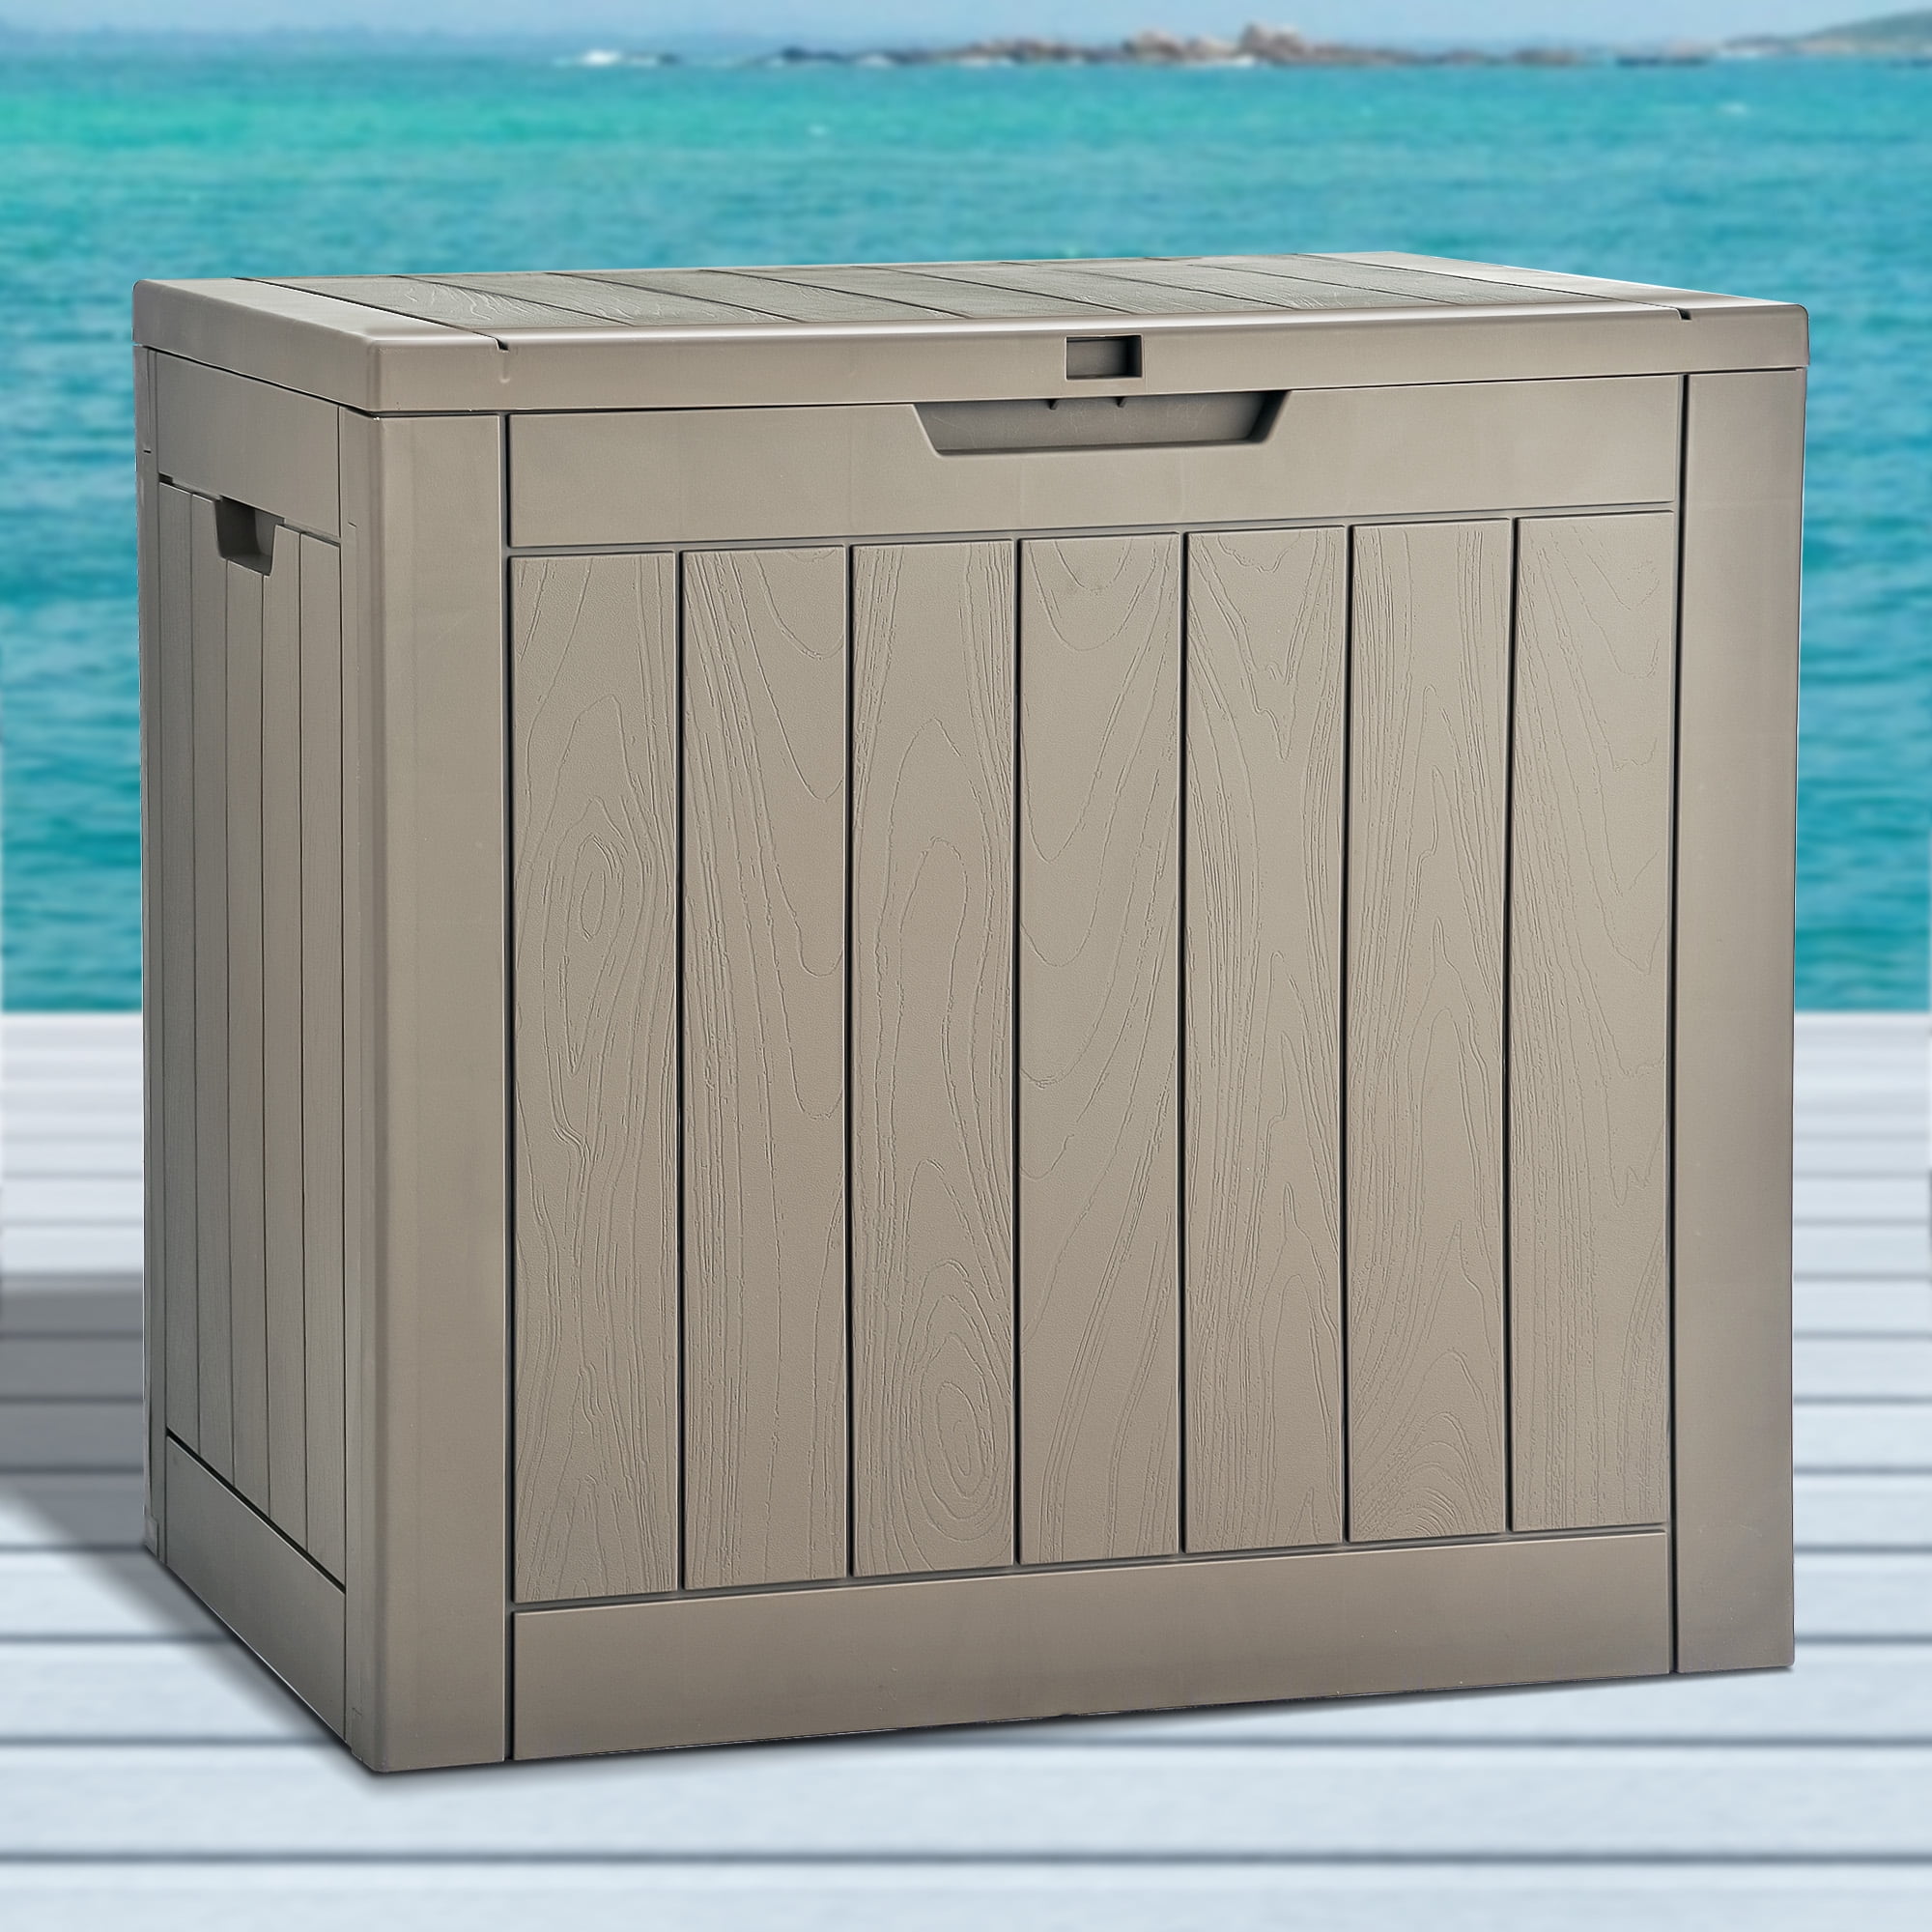 Dream House Outdoor Storage Box, 30 Gallon Deck Box For Patio Furniture,  Pool Accessories, Cushions, Garden Tools And Outdoor Waterproof Resin With  Lockable Lid And Side Handles